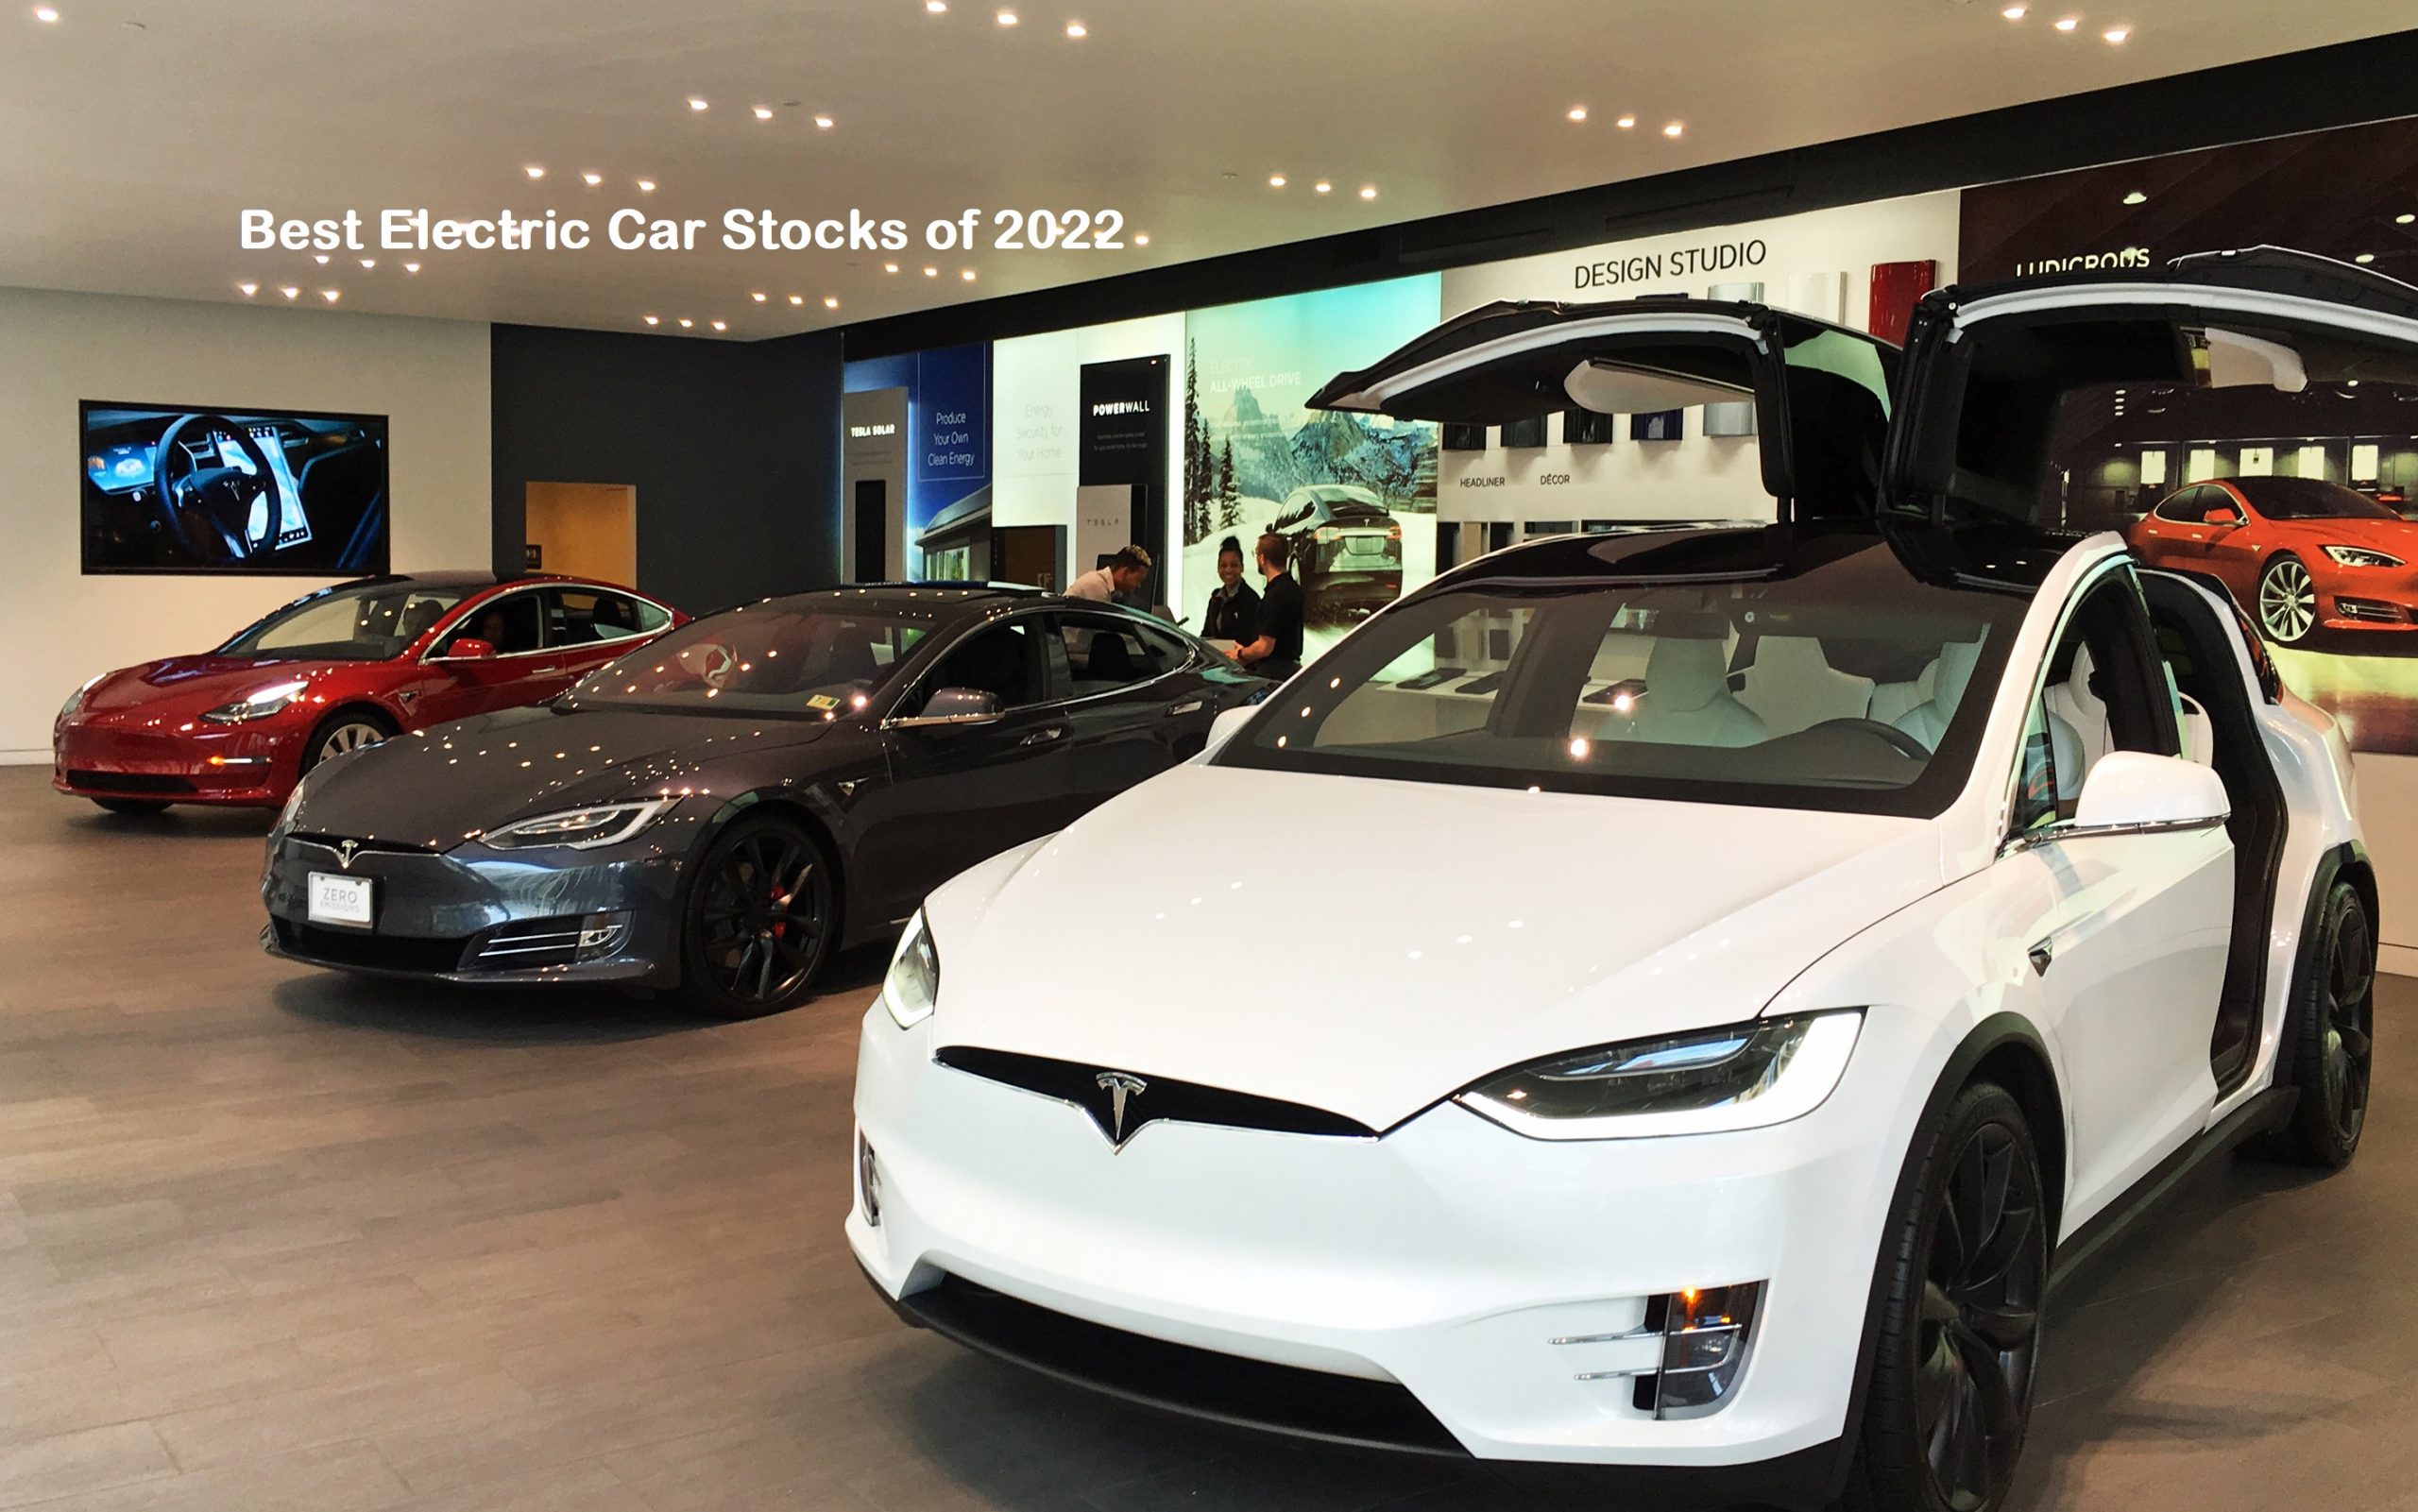 Best Electric Car Stocks of 2022